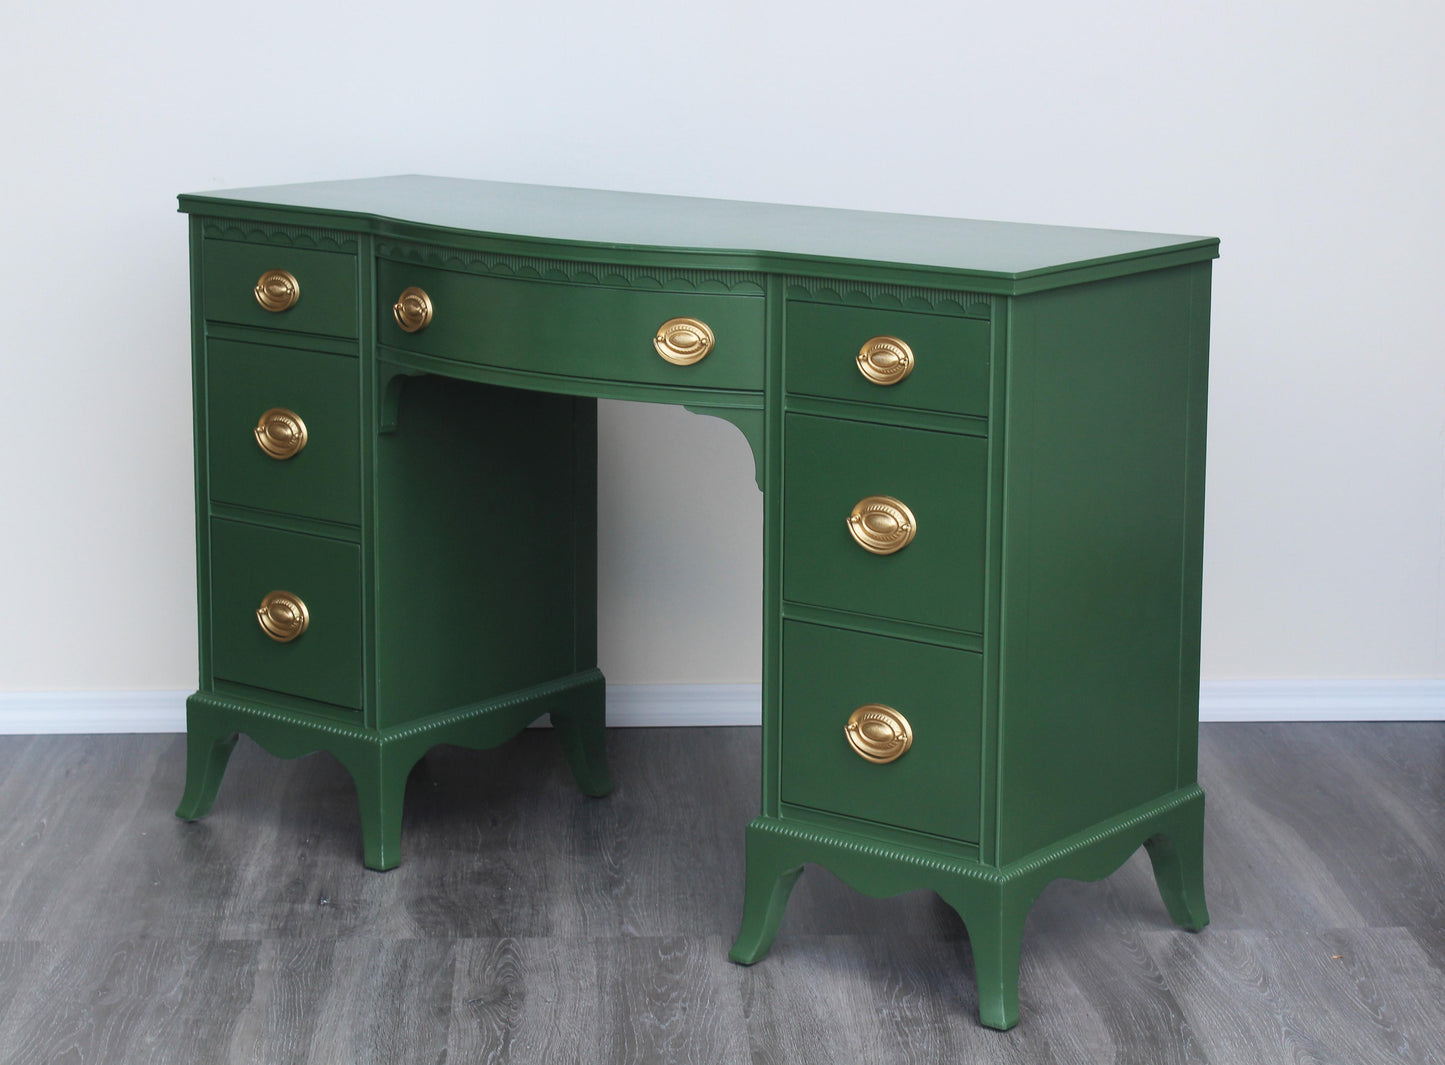 Vintage solid built double pedestal desk with dovetail joint.  This desk was professionally refinished in green with gloss finish and gold painted hardware.  Dimensions: 47"Width x 16.5"Depth x 31"Height. 